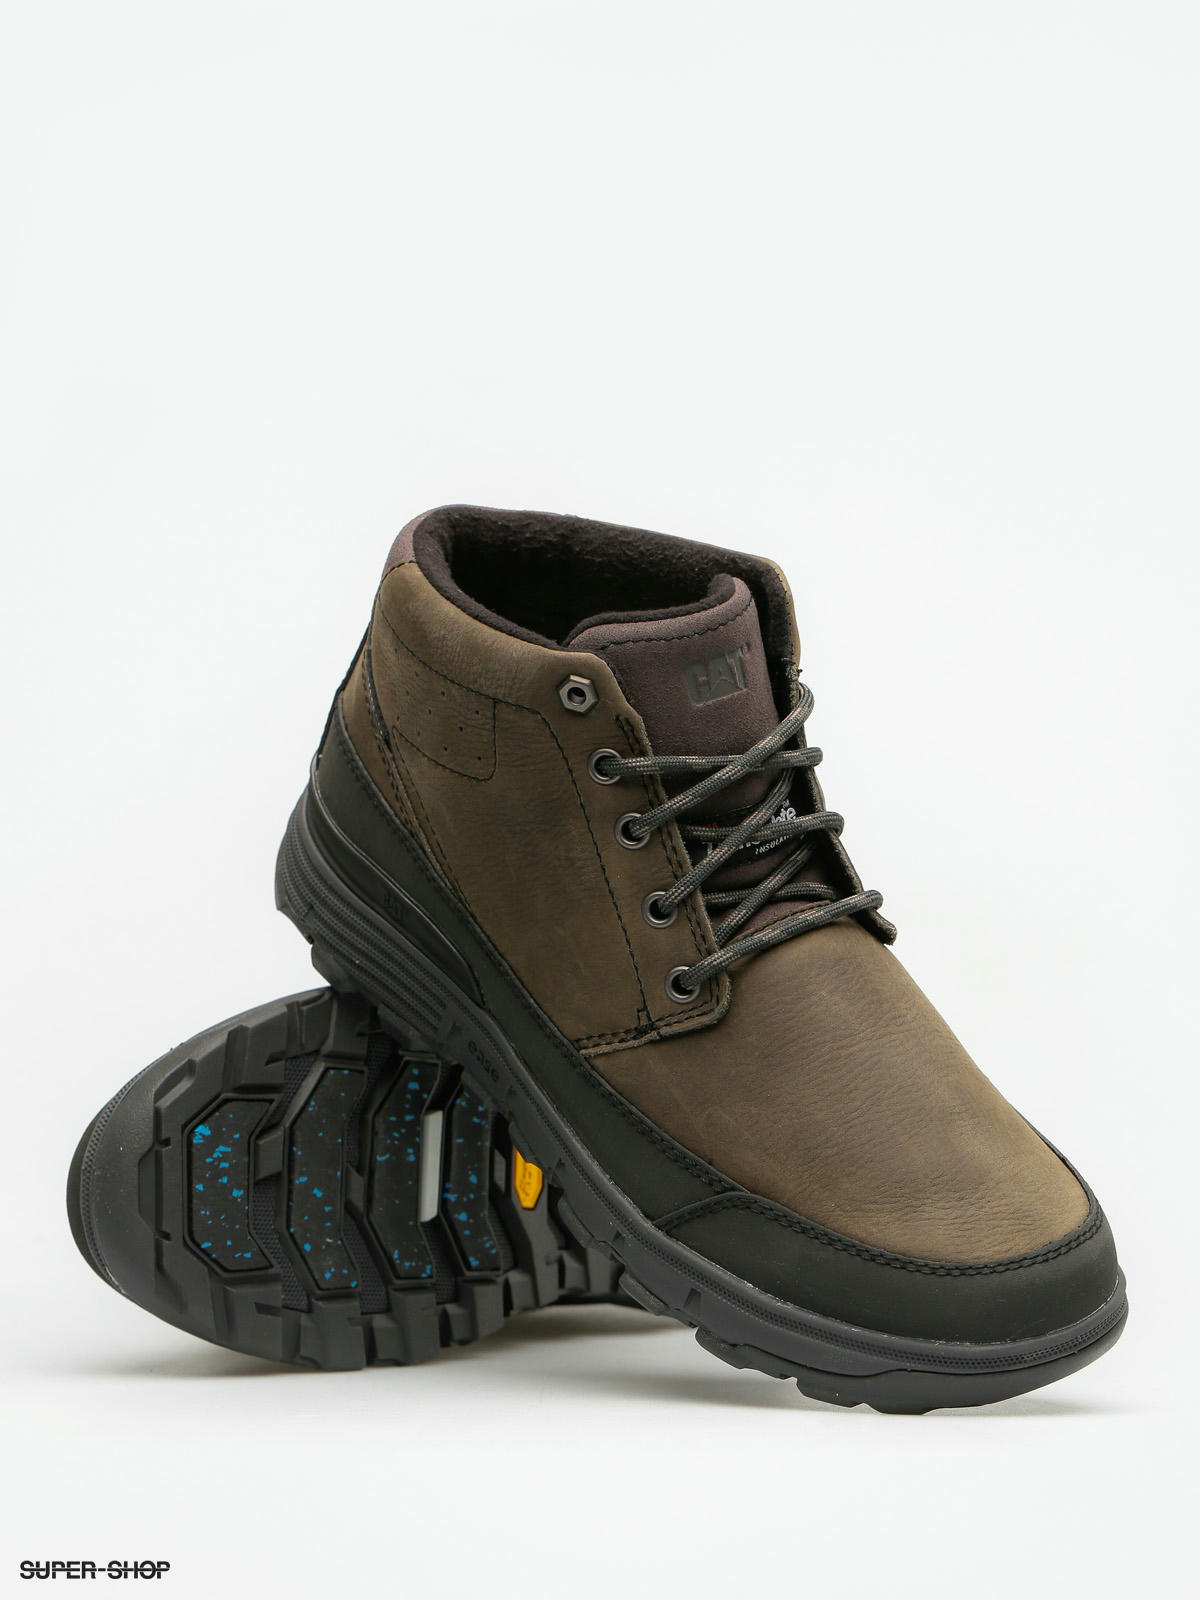 Caterpillar Winter shoes Drover Ice+ Wp 